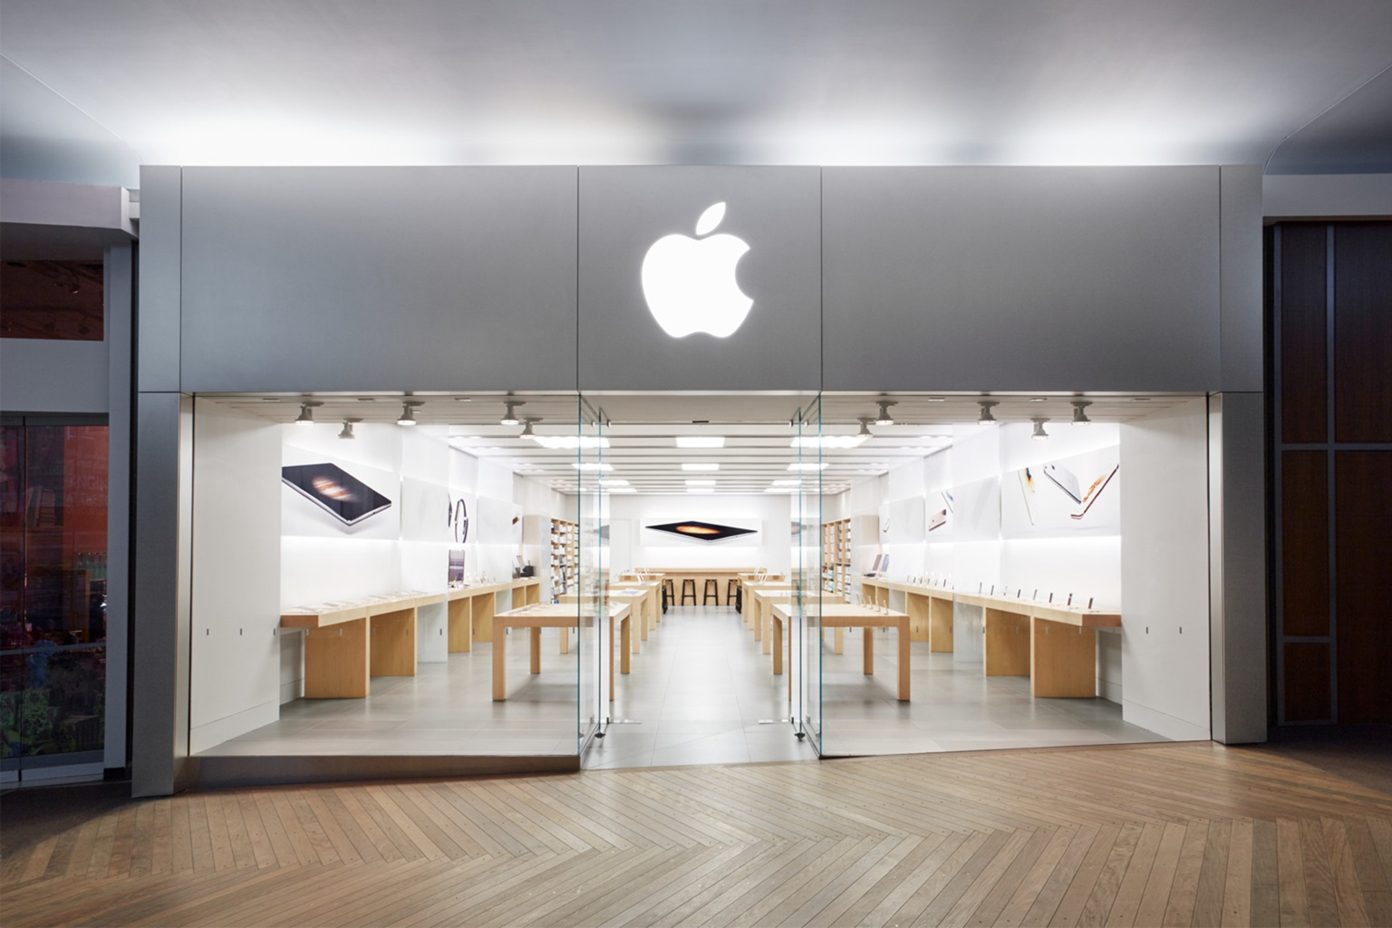 Architecture, creativity, community: A field guide to Apple retail